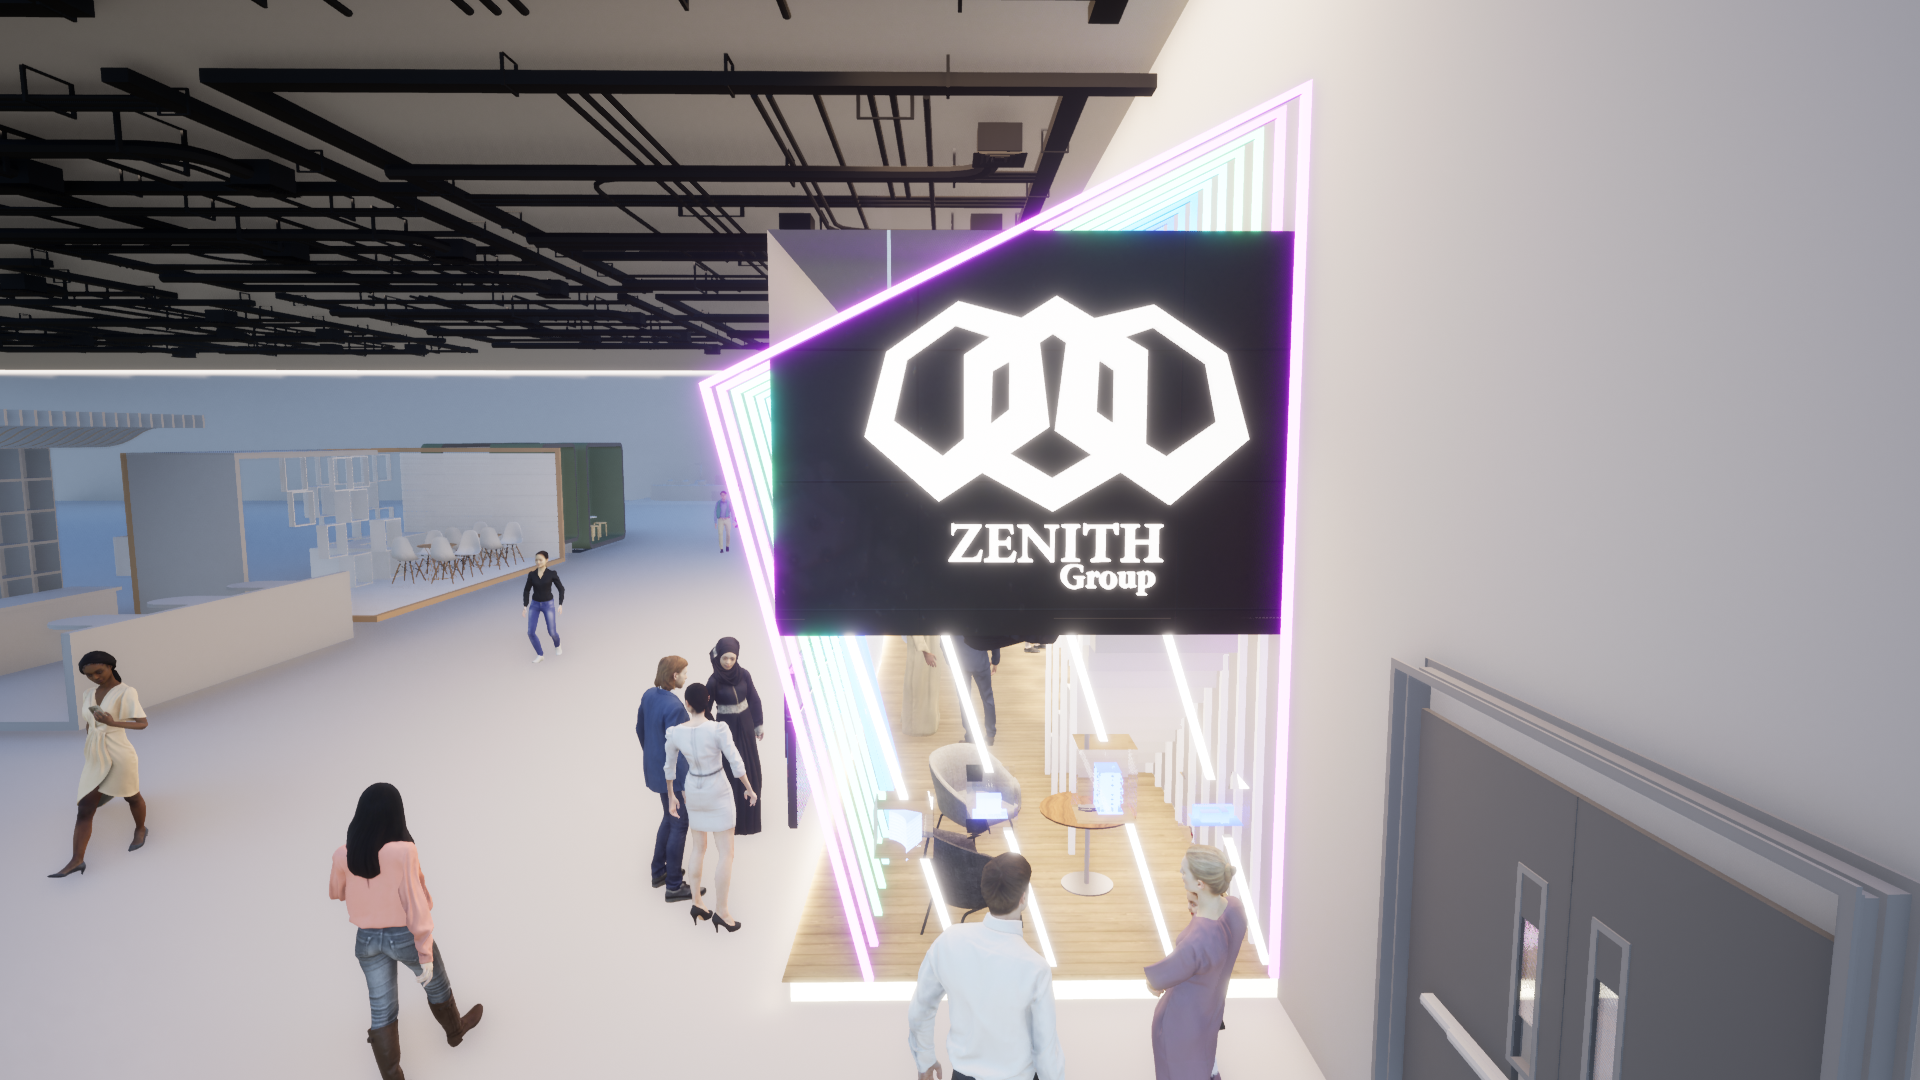 ZENITH Group Stand-Soodeh Abedini-Render (04)